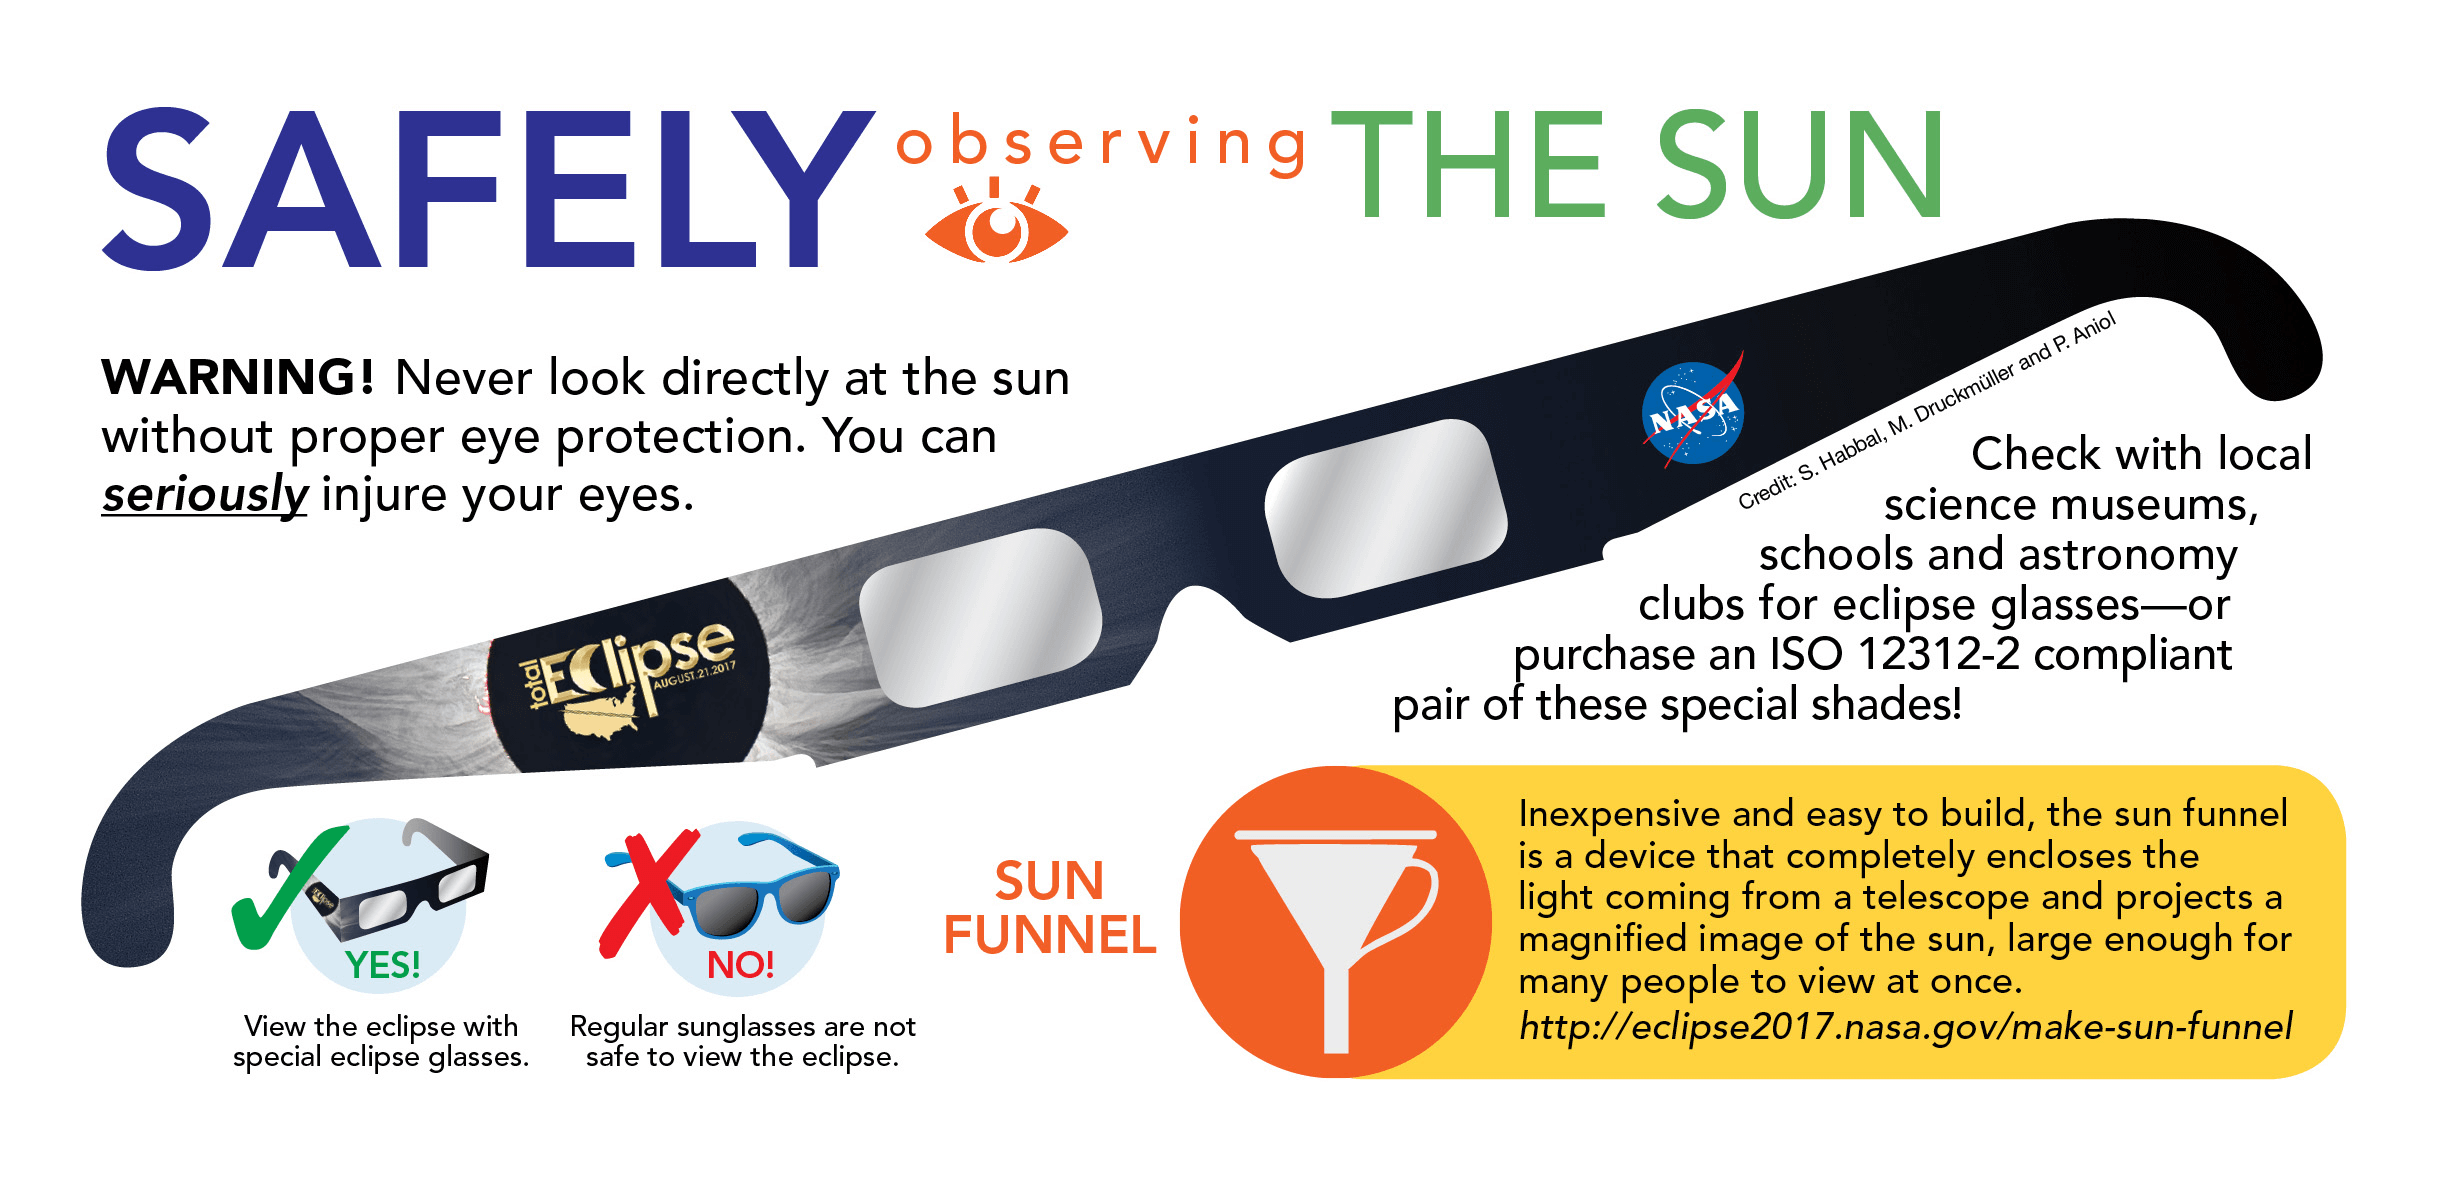 Check with local science museums, schools and astronomy clubs for eclipse glasses—or purchase an ISO 12312-2 compliant and CE certified pair of these special shades!